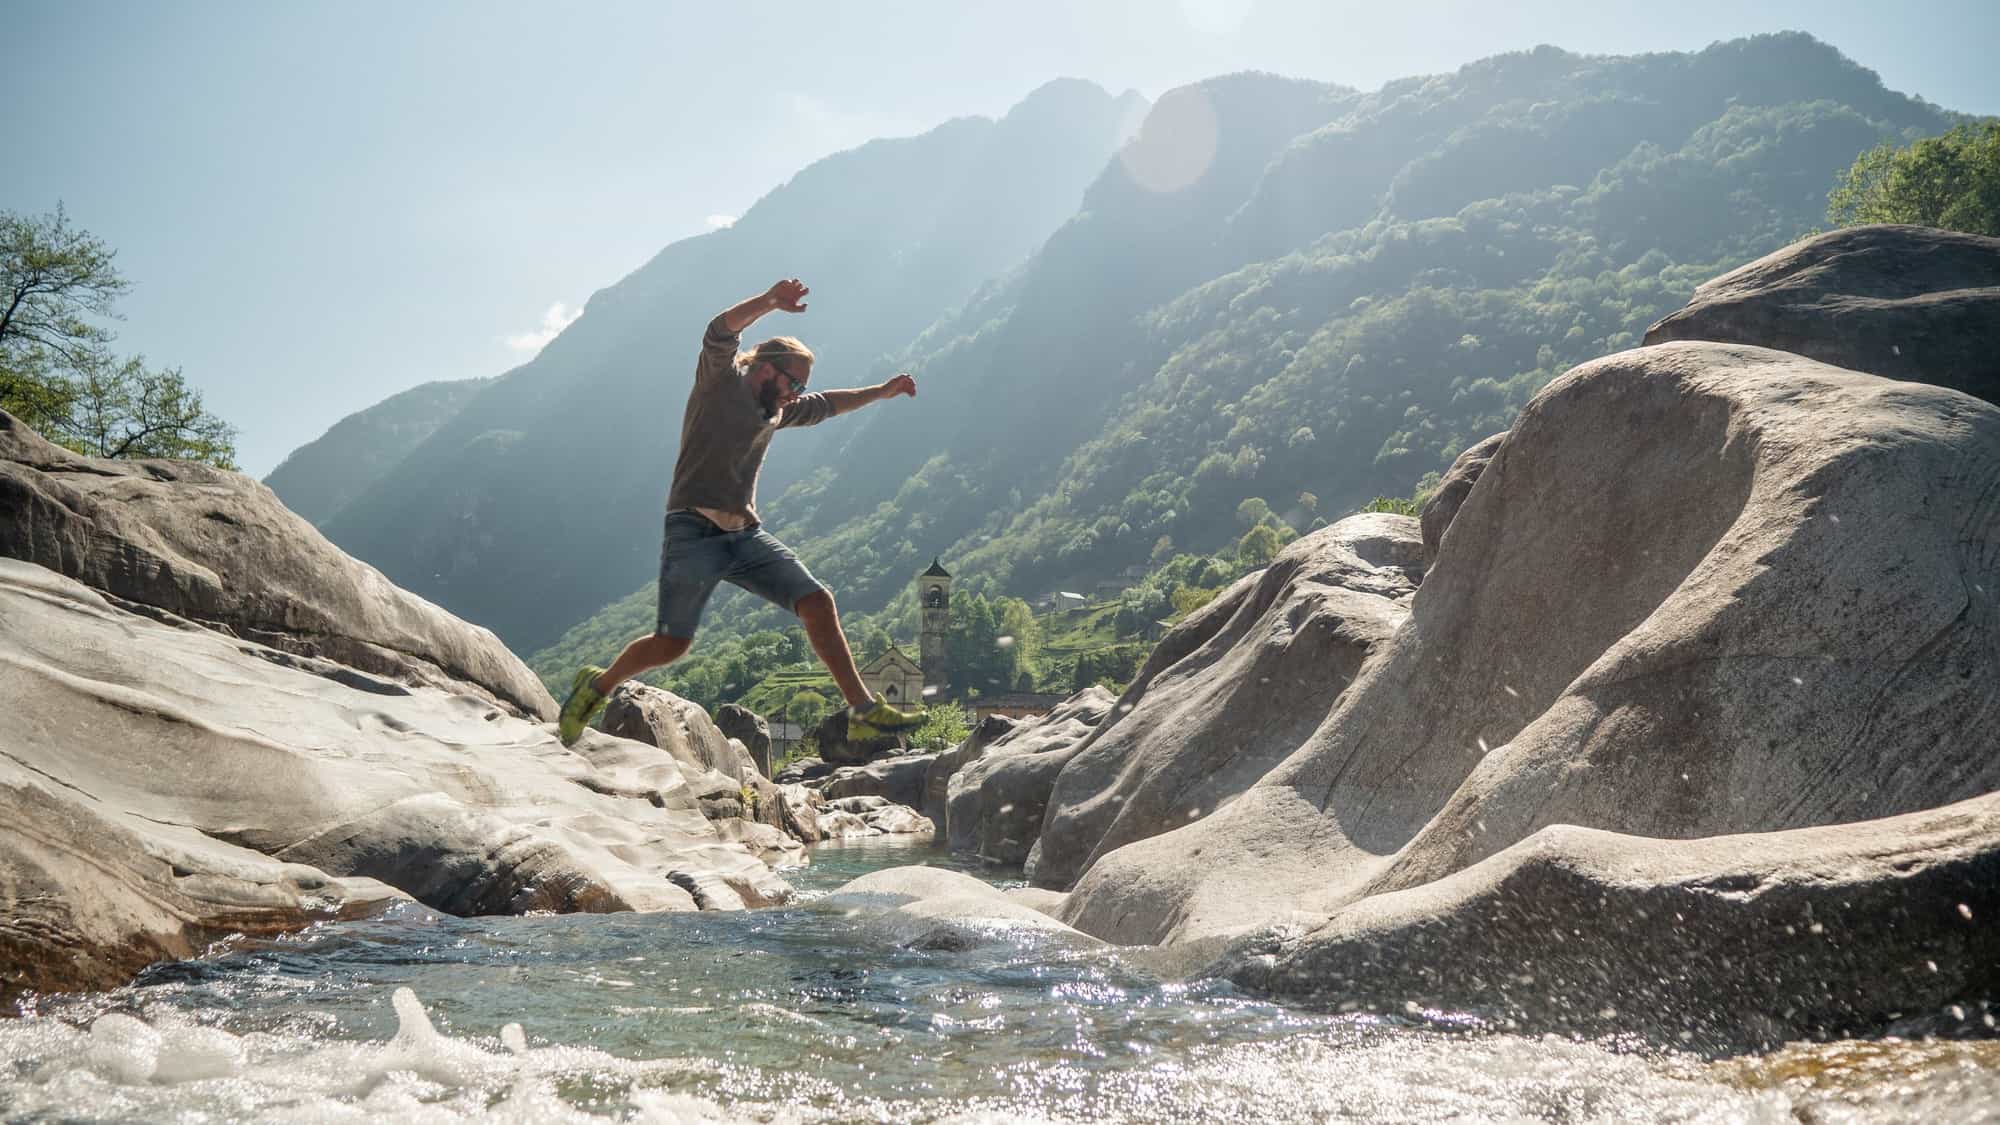 A man jumps over a river, bouncing from one rock to another.